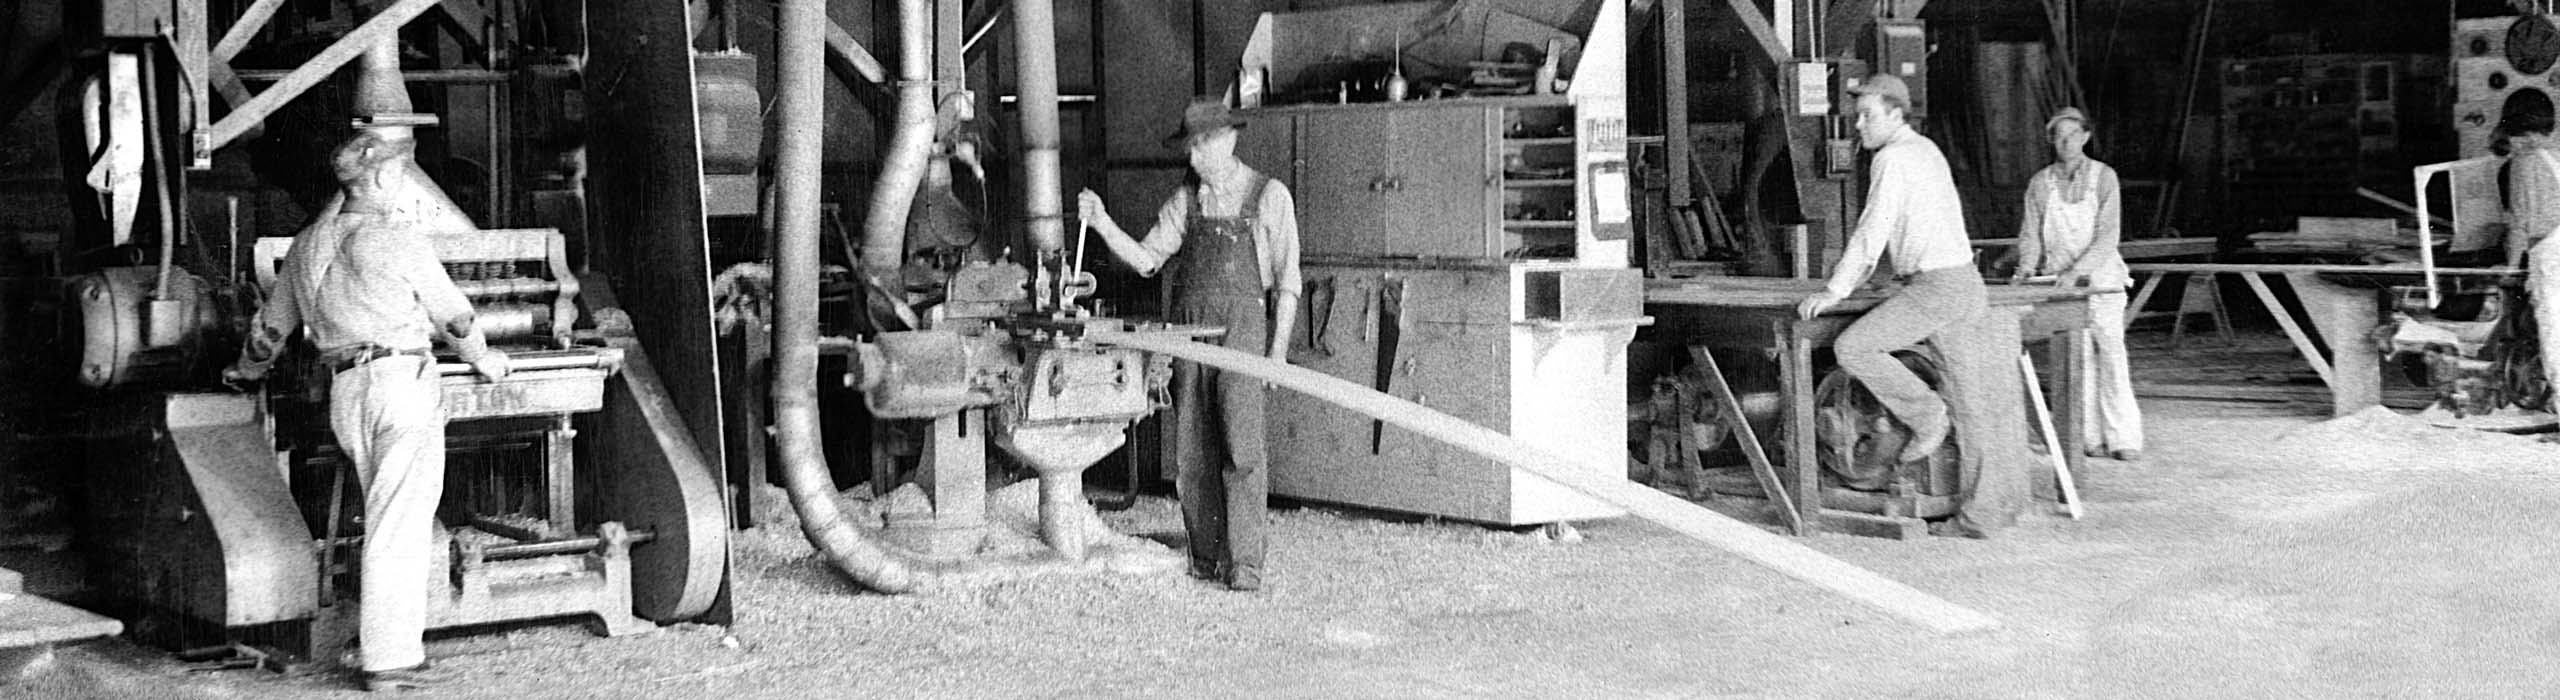 Old black and white photo of Ganahl workers in a millshop.